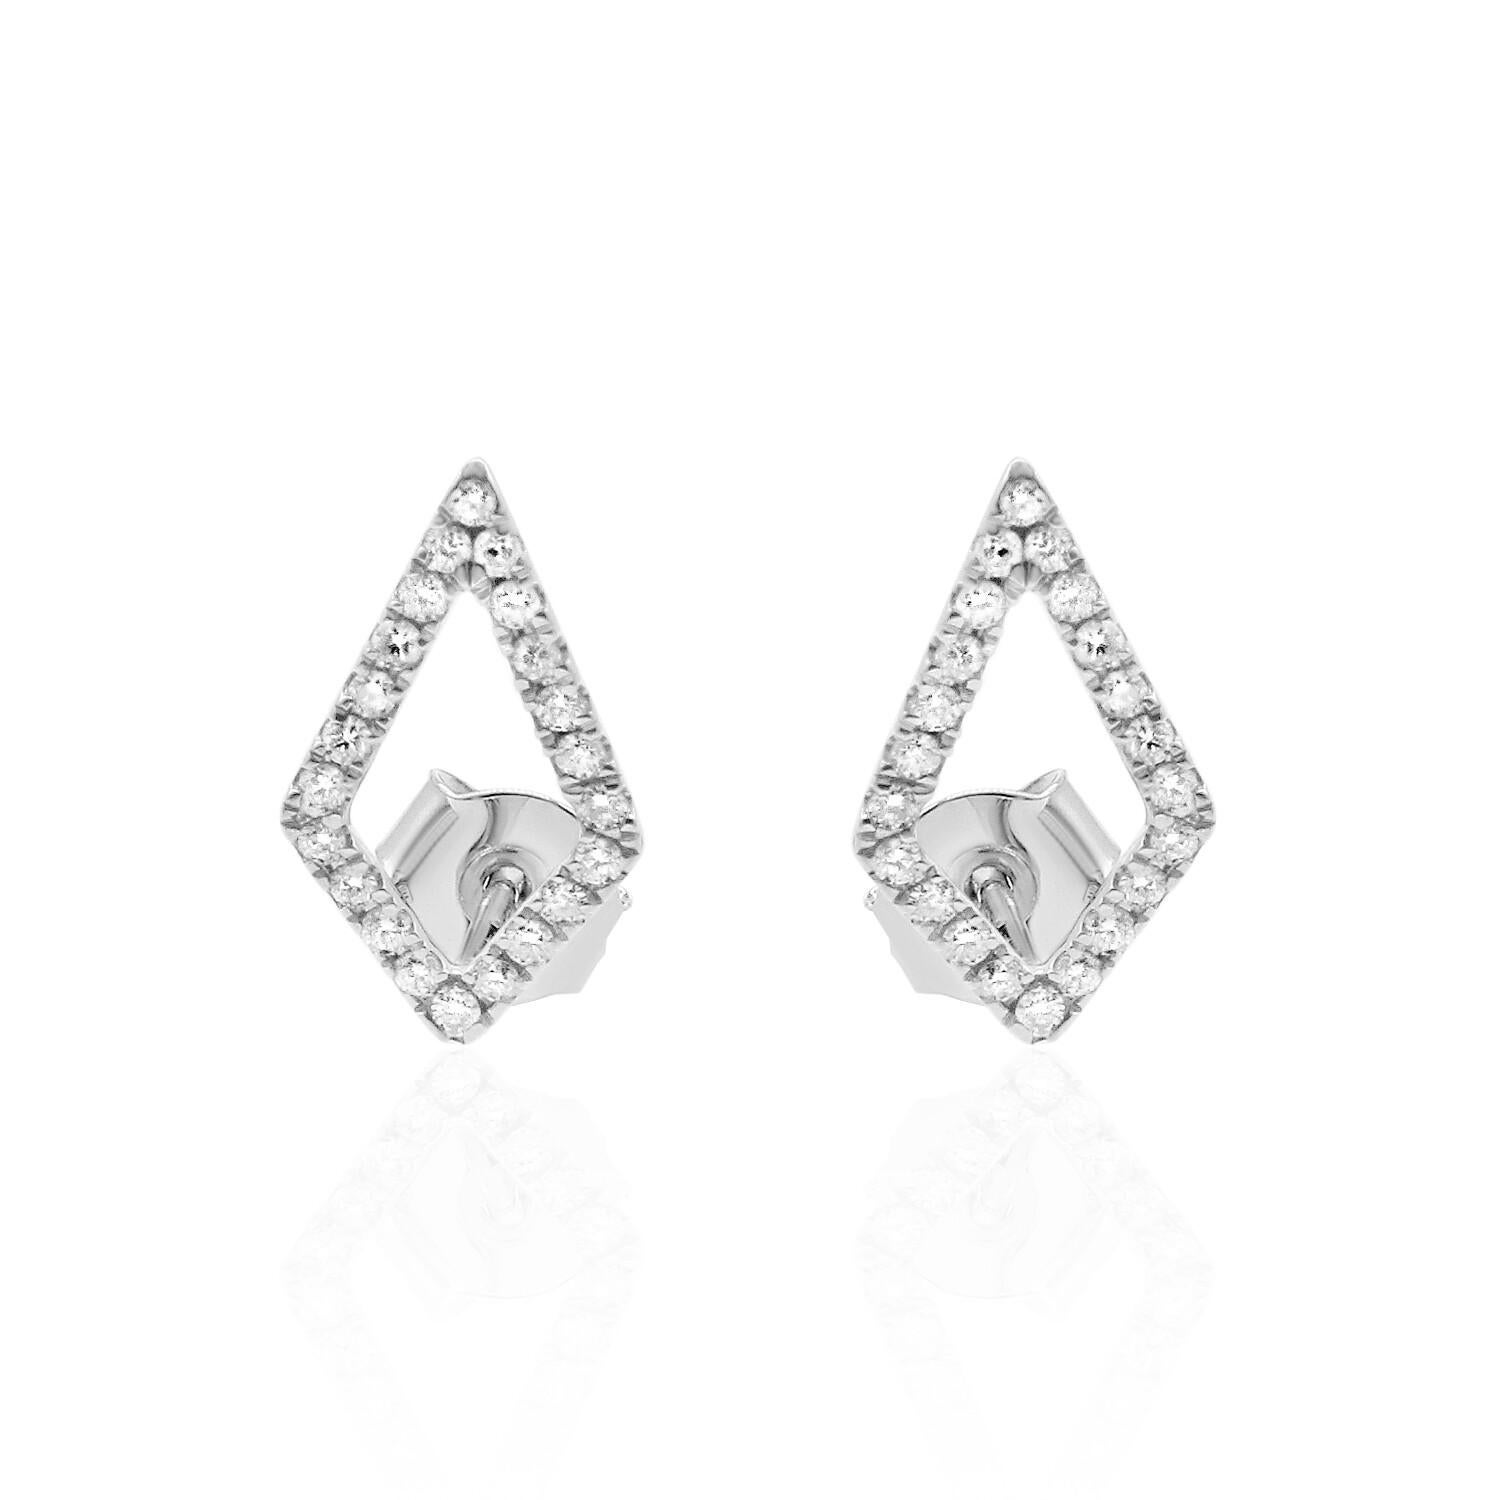 Lovely Kite Shape Diamond Stud Earrings, featuring:
✧ 44 natural earth mined diamonds G-H color VS-SI weighing 0.26 carats 
✧ Measurements: 14.60mm*8.40mm
✧ Available in 14K White, Yellow, and Rose Gold
✧ Push back friction closure
✧ Multiple